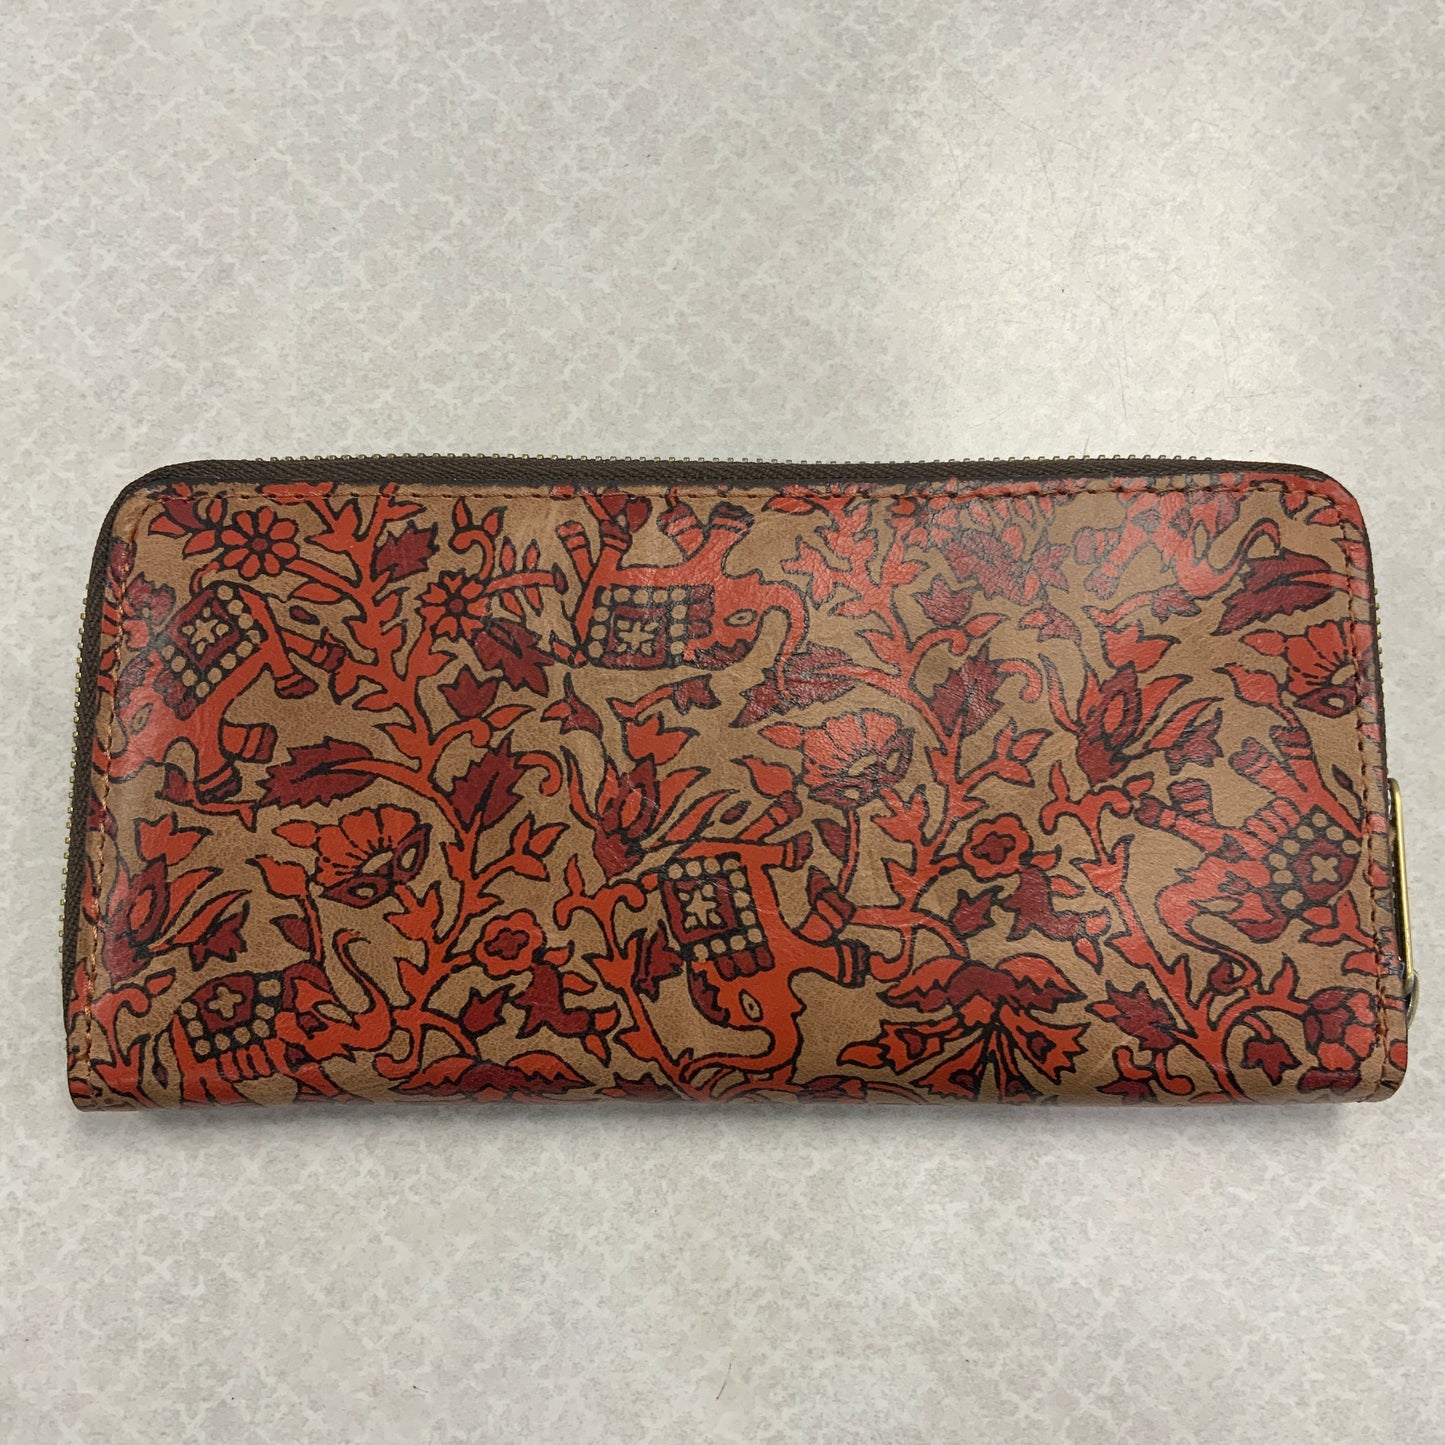 Wallet Leather By Patricia Nash  Size: Medium